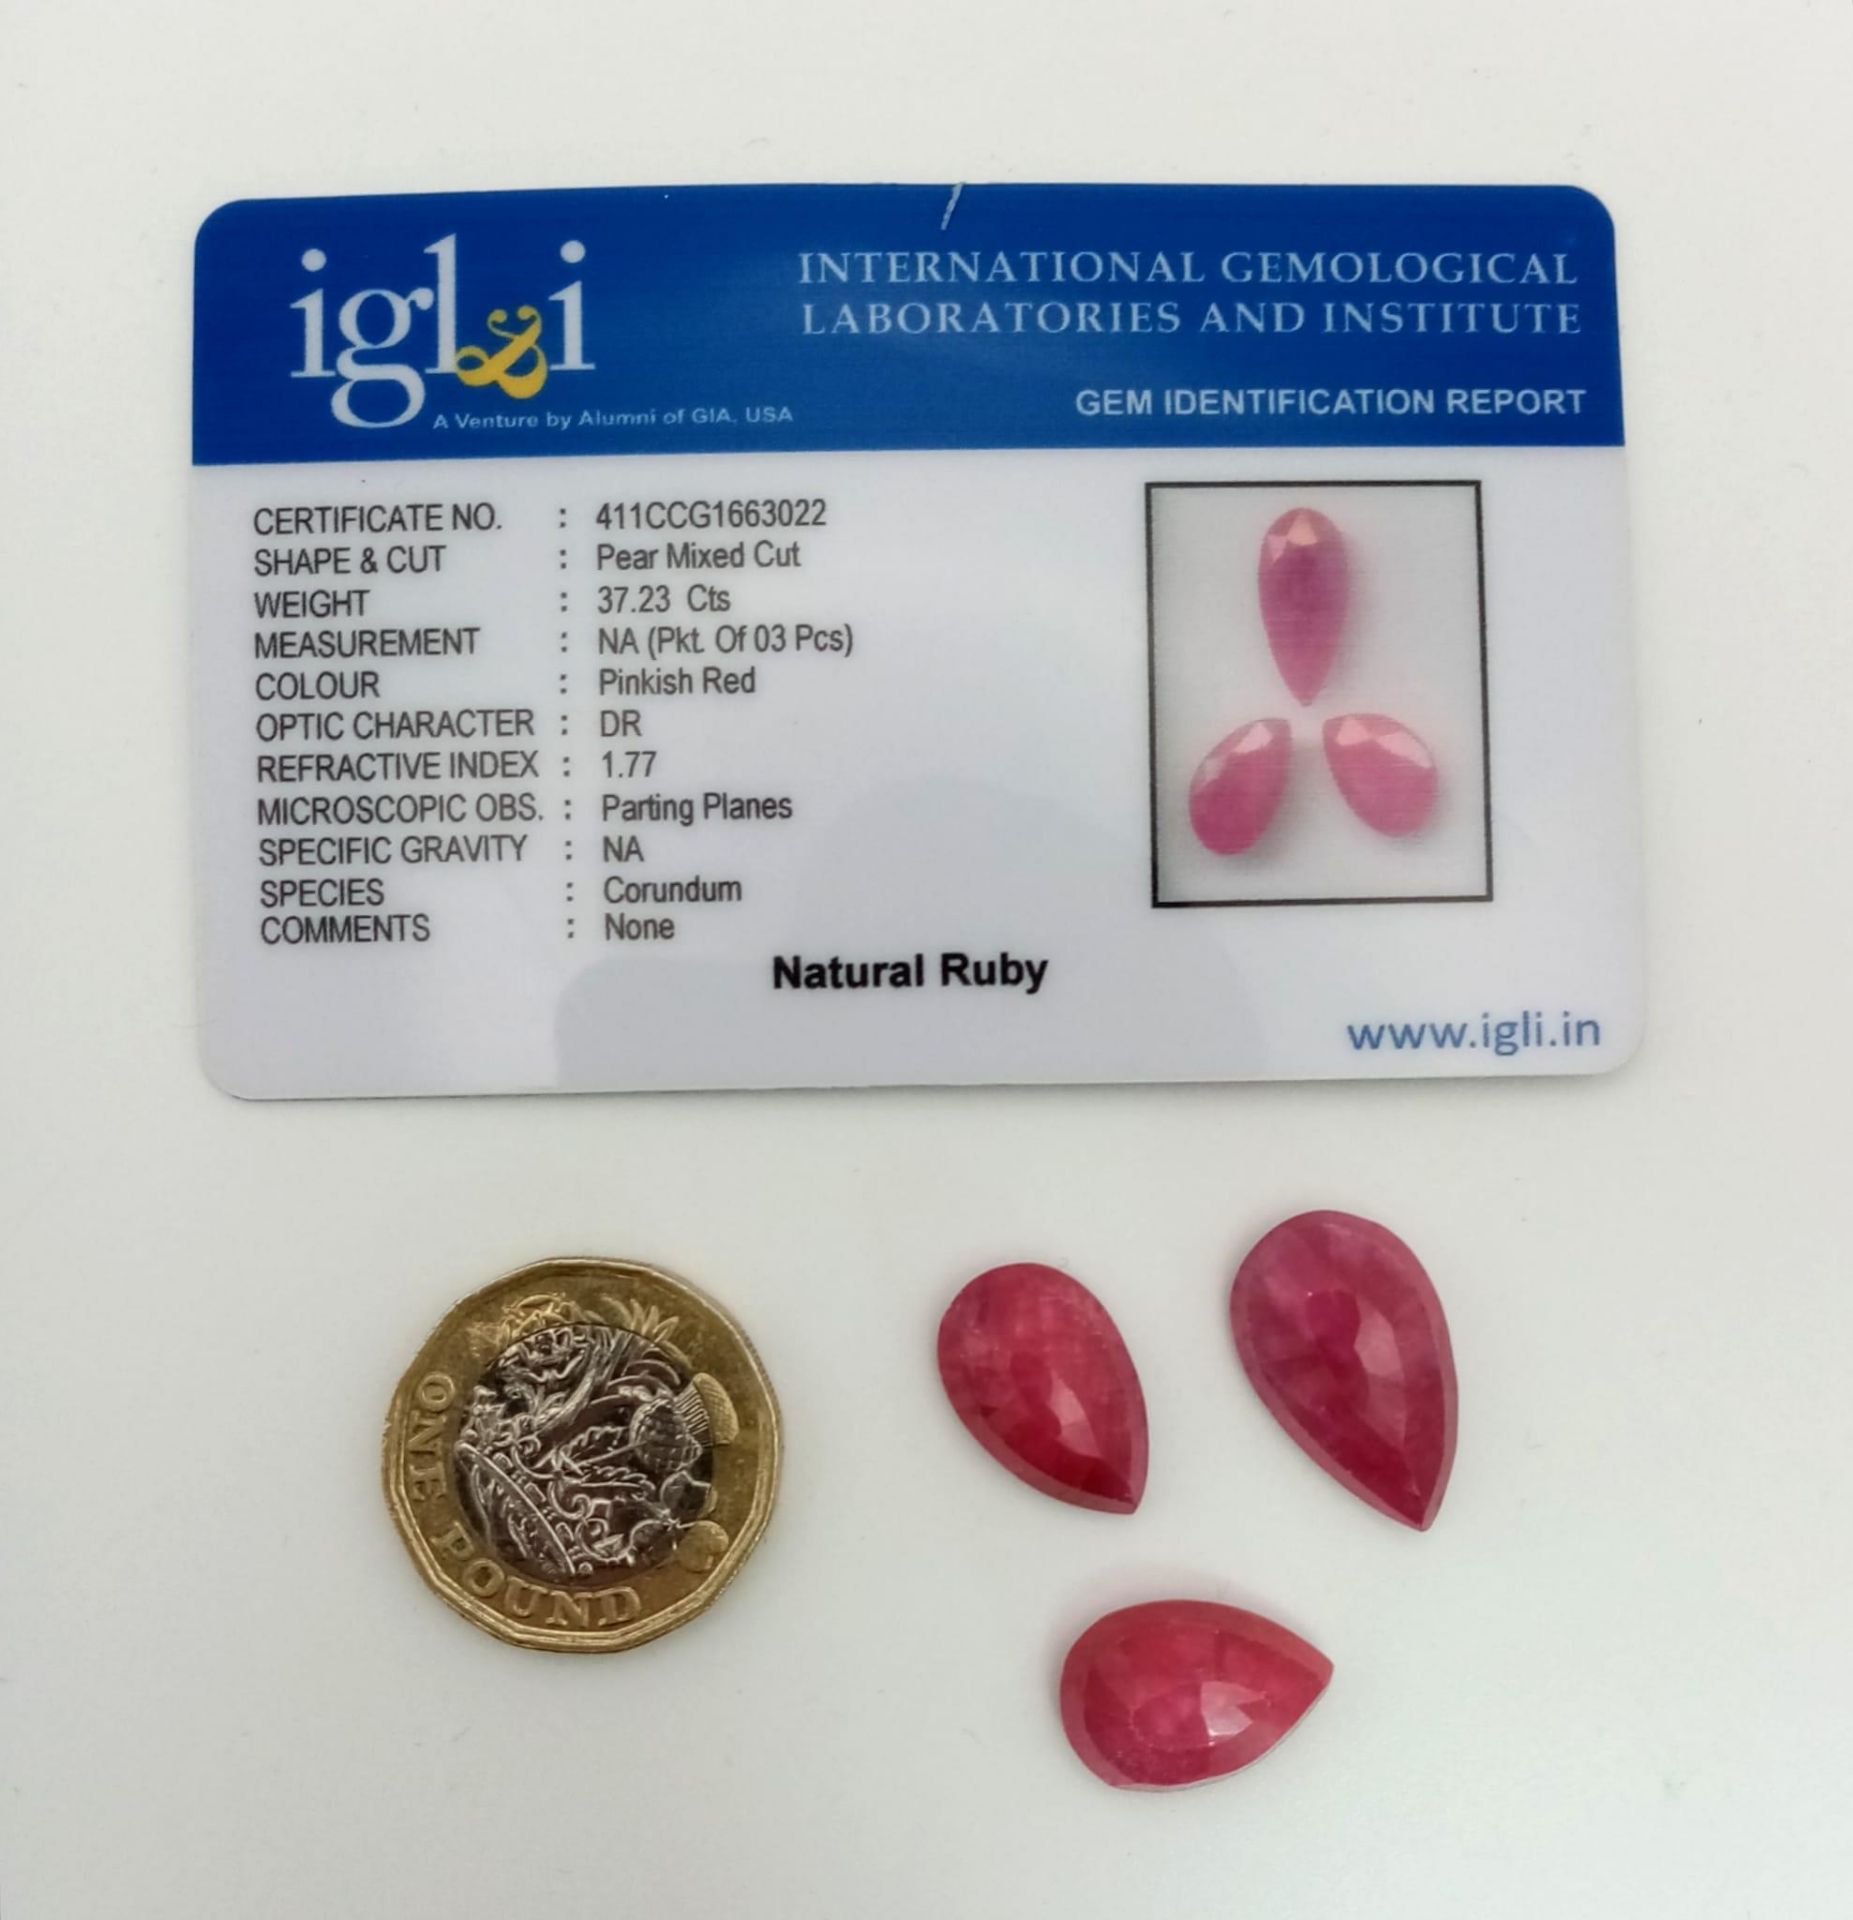 37.23 Ct Faceted Ruby Gemstones Lot of 3 Pcs, Pear Shapes, IGL&I Certified - Image 4 of 4